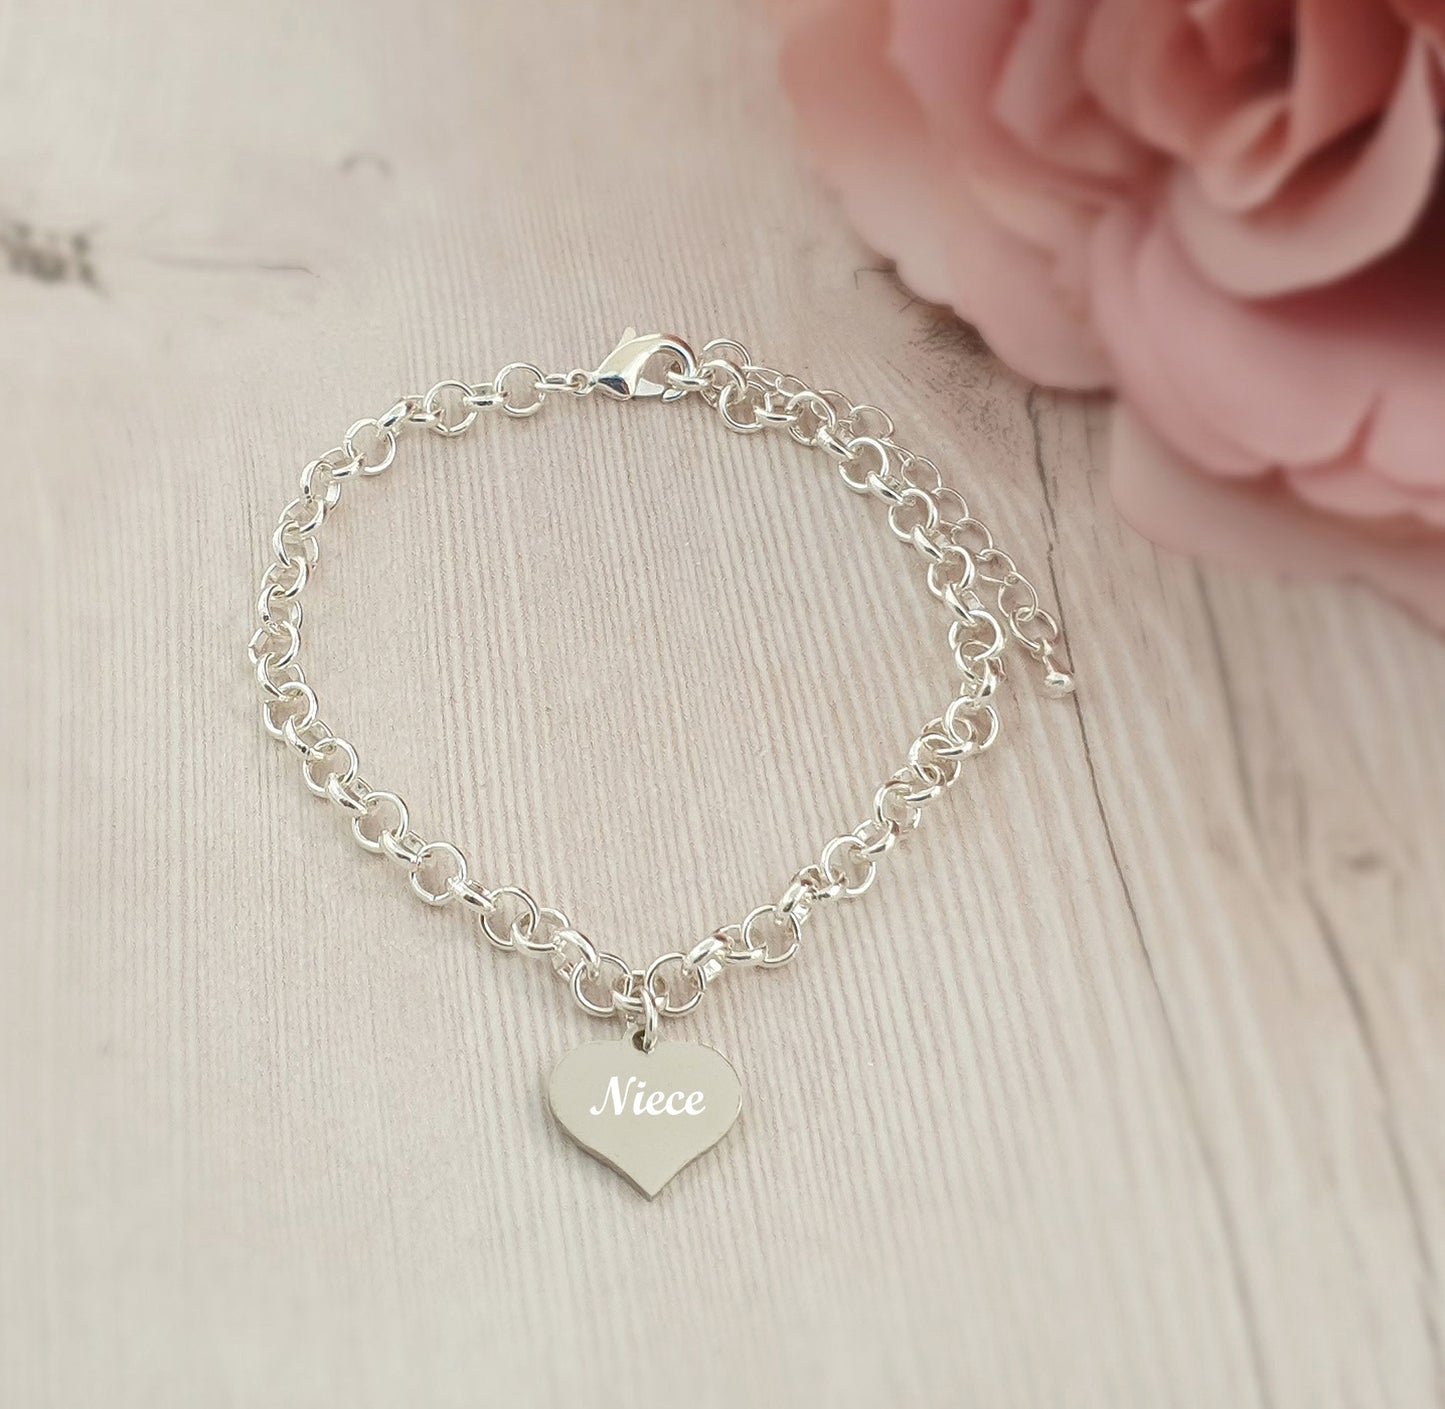 Special Niece Engraved Heart Charm Link Bracelet, Personalised Message, Message Jewellery